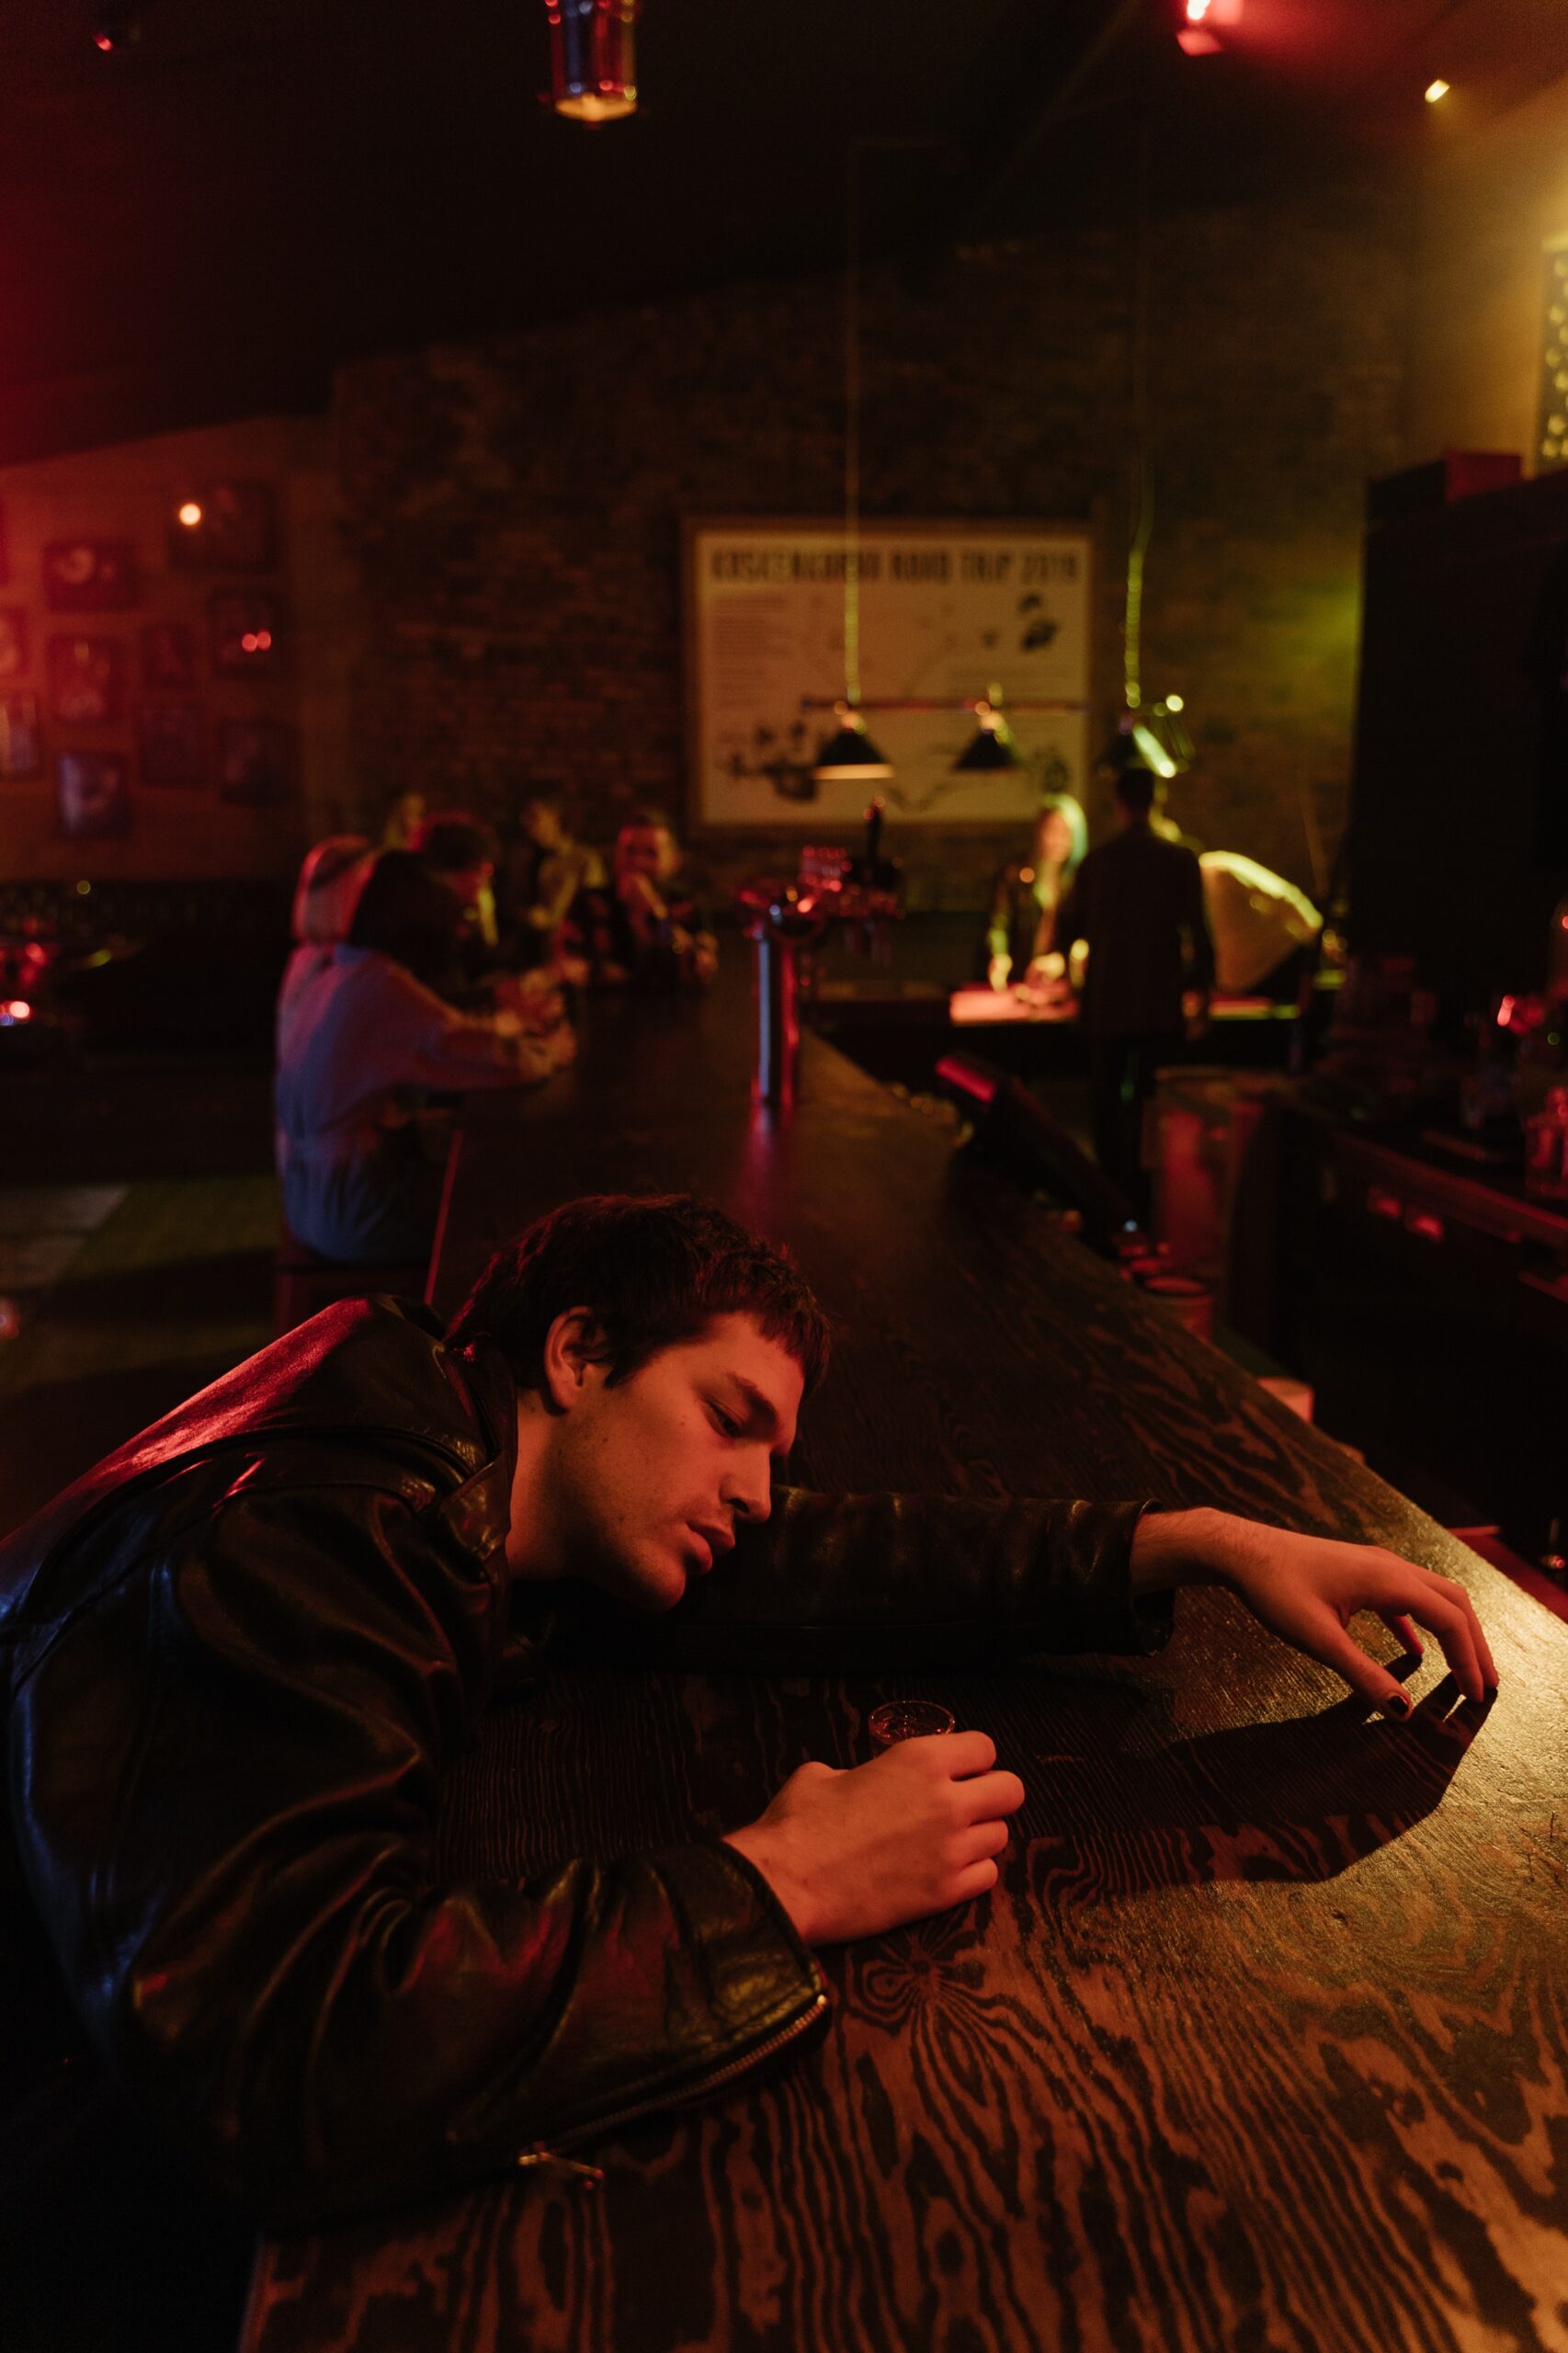 Drunk young man asleep on a bar with friends enjoying in the background